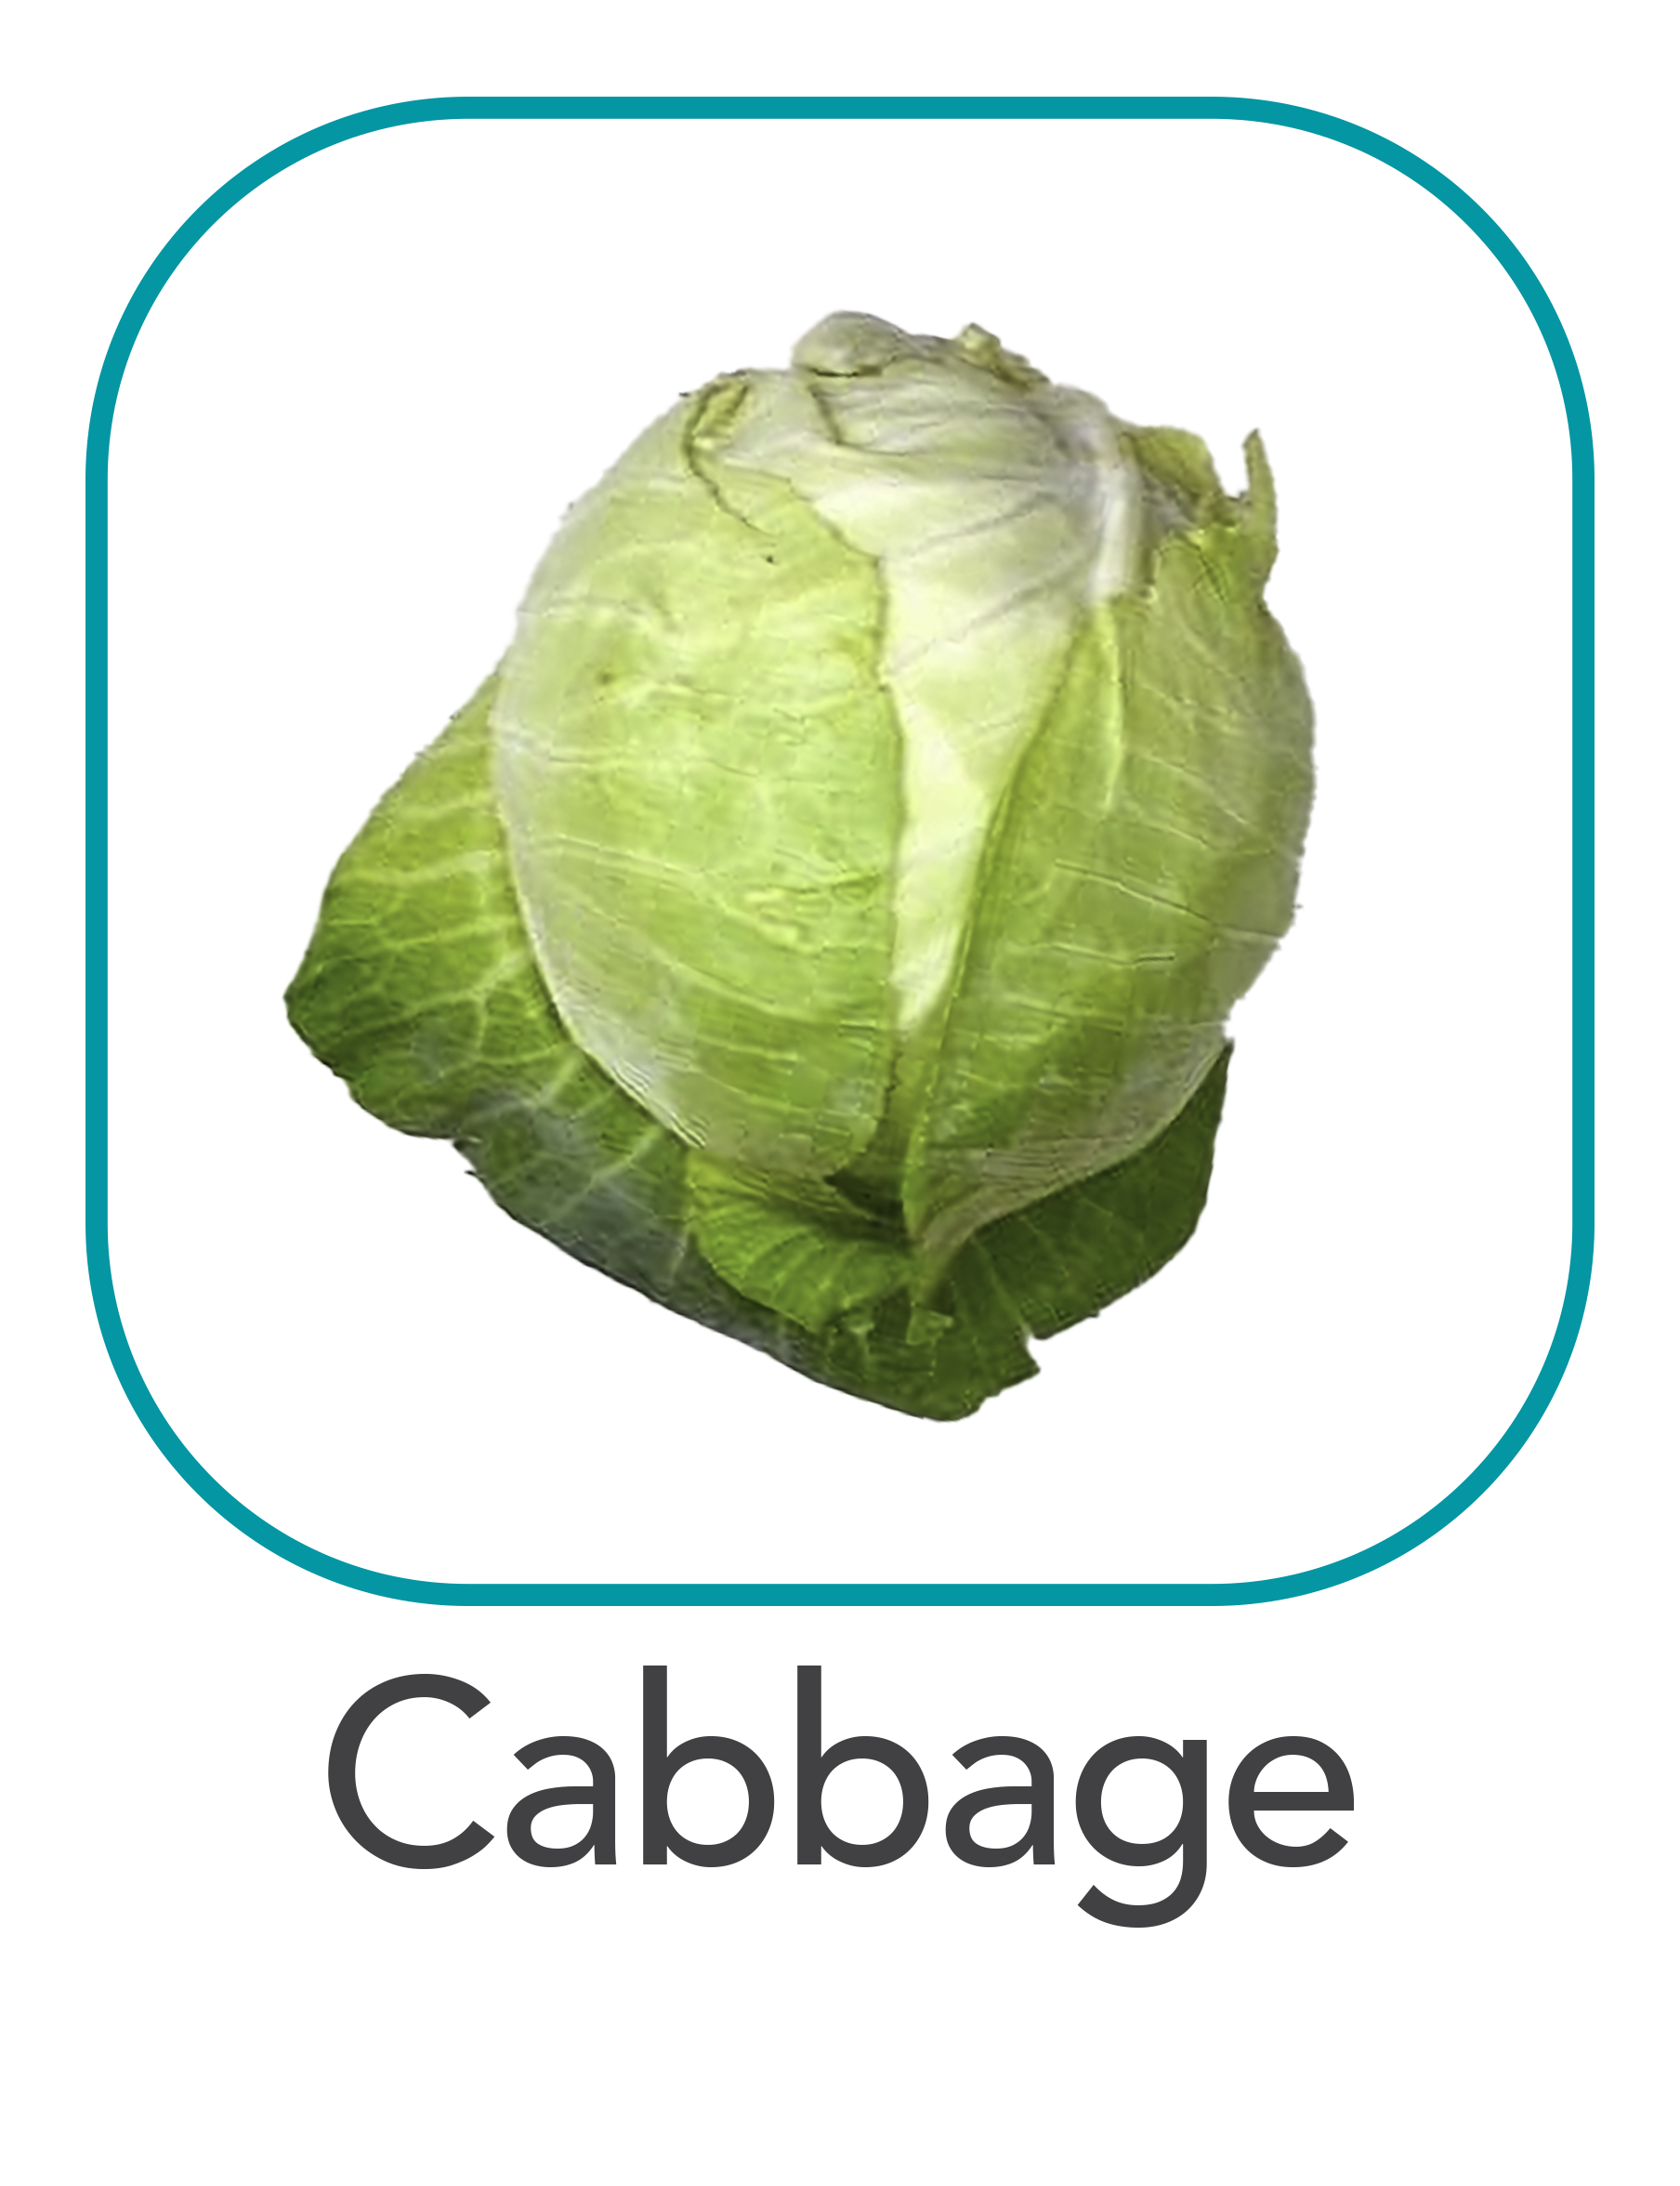 Cabbage_web.png